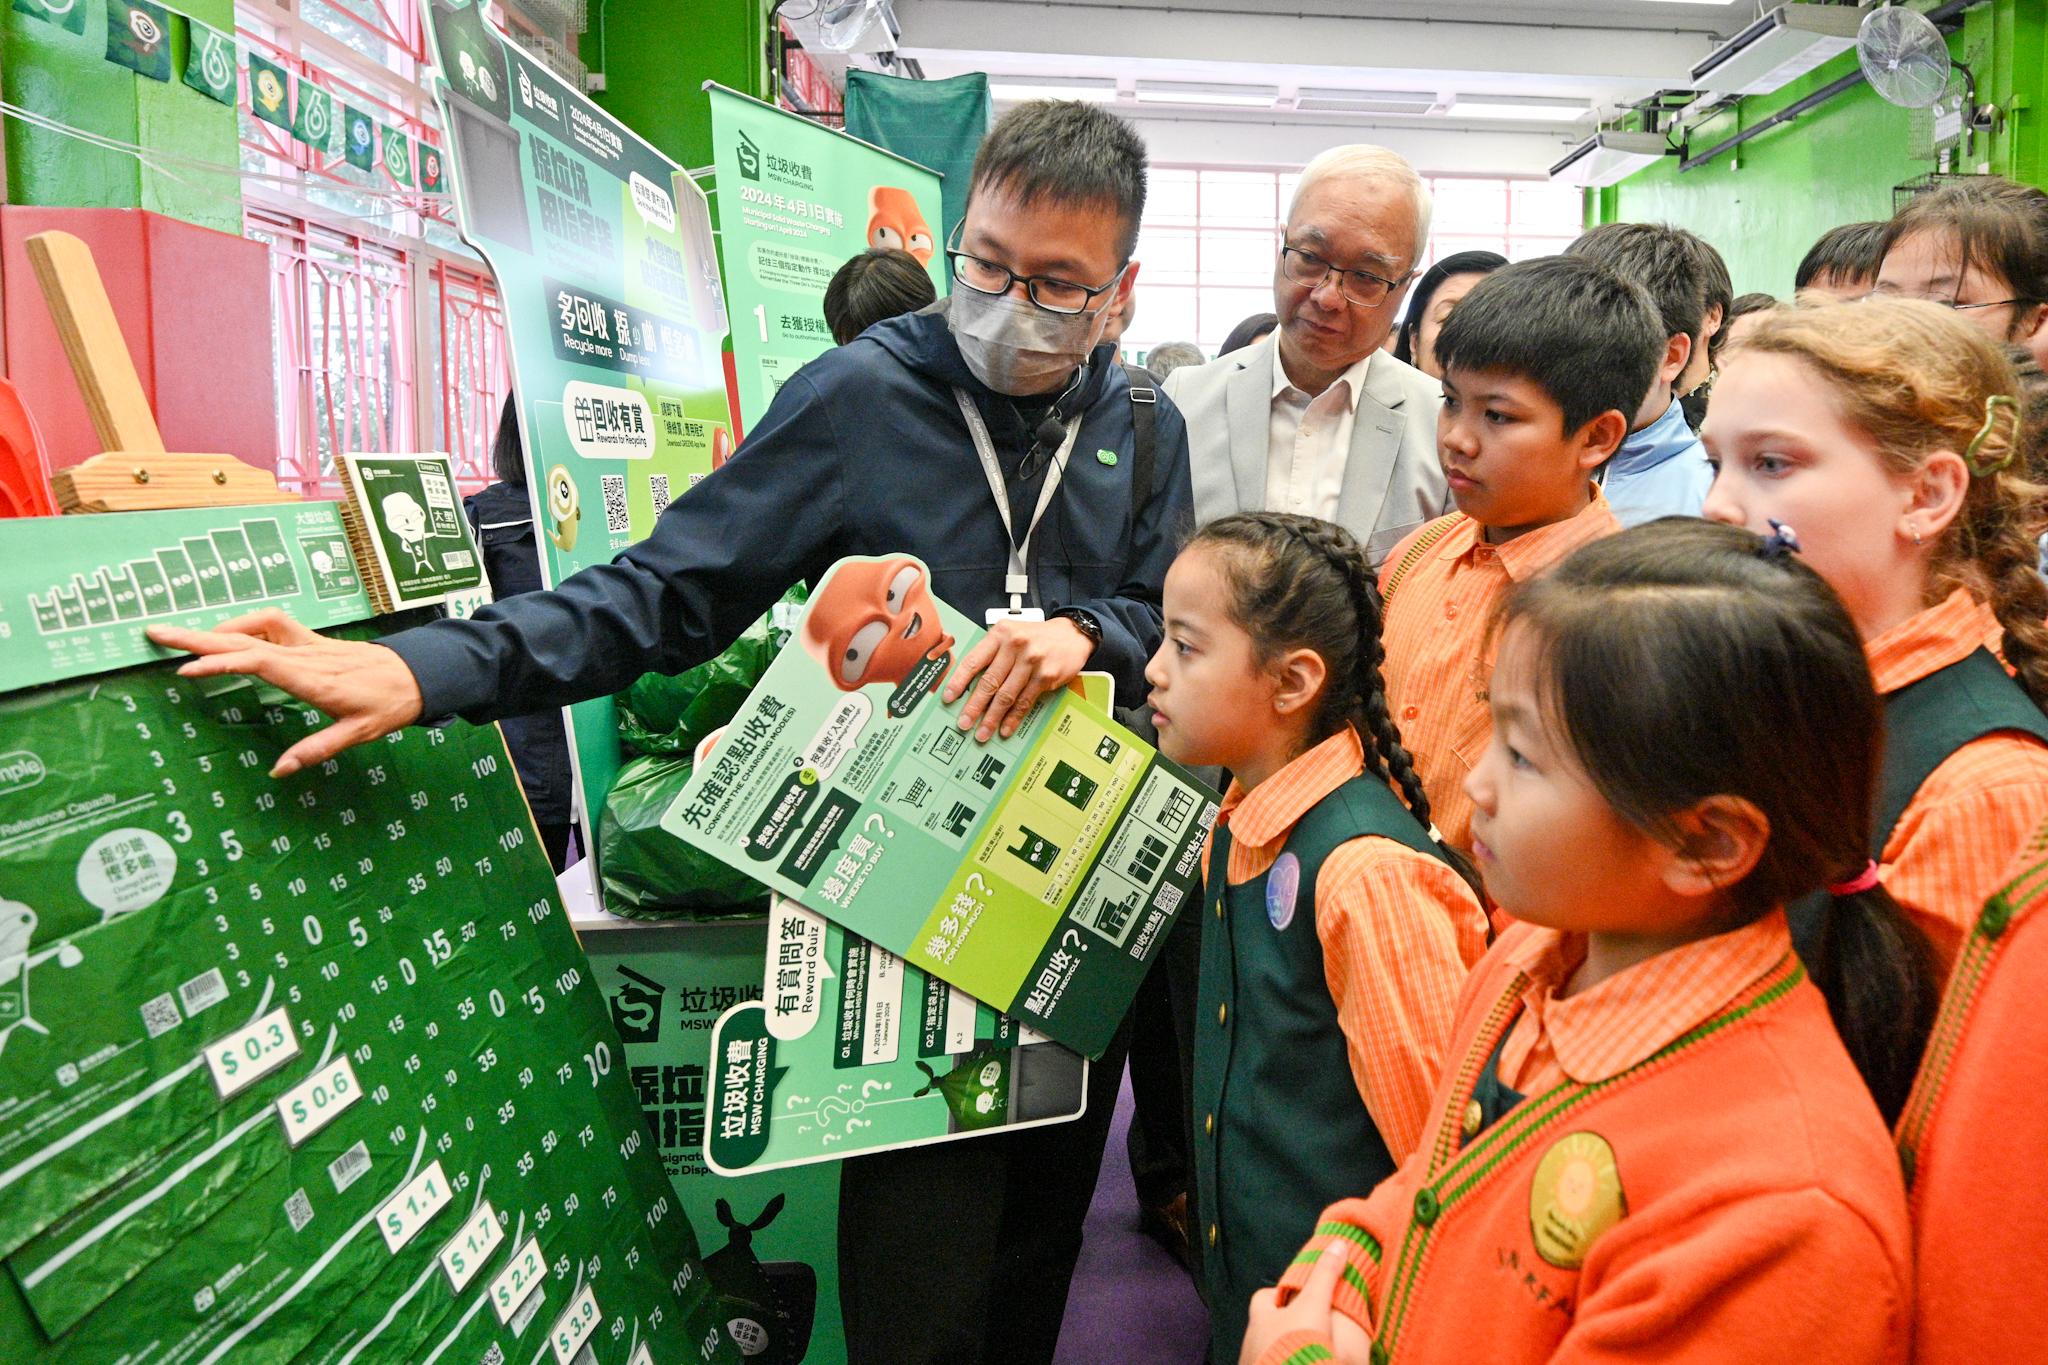 The Secretary for Environment and Ecology, Mr Tse Chin-wan, and the Under Secretary for Education, Mr Sze Chun-fai, today (January 16) visited Yaumati Kaifong Association School to promote municipal solid waste charging to students. Photo shows Mr Tse (second left) browsing the information board on municipal solid waste charging with school students.